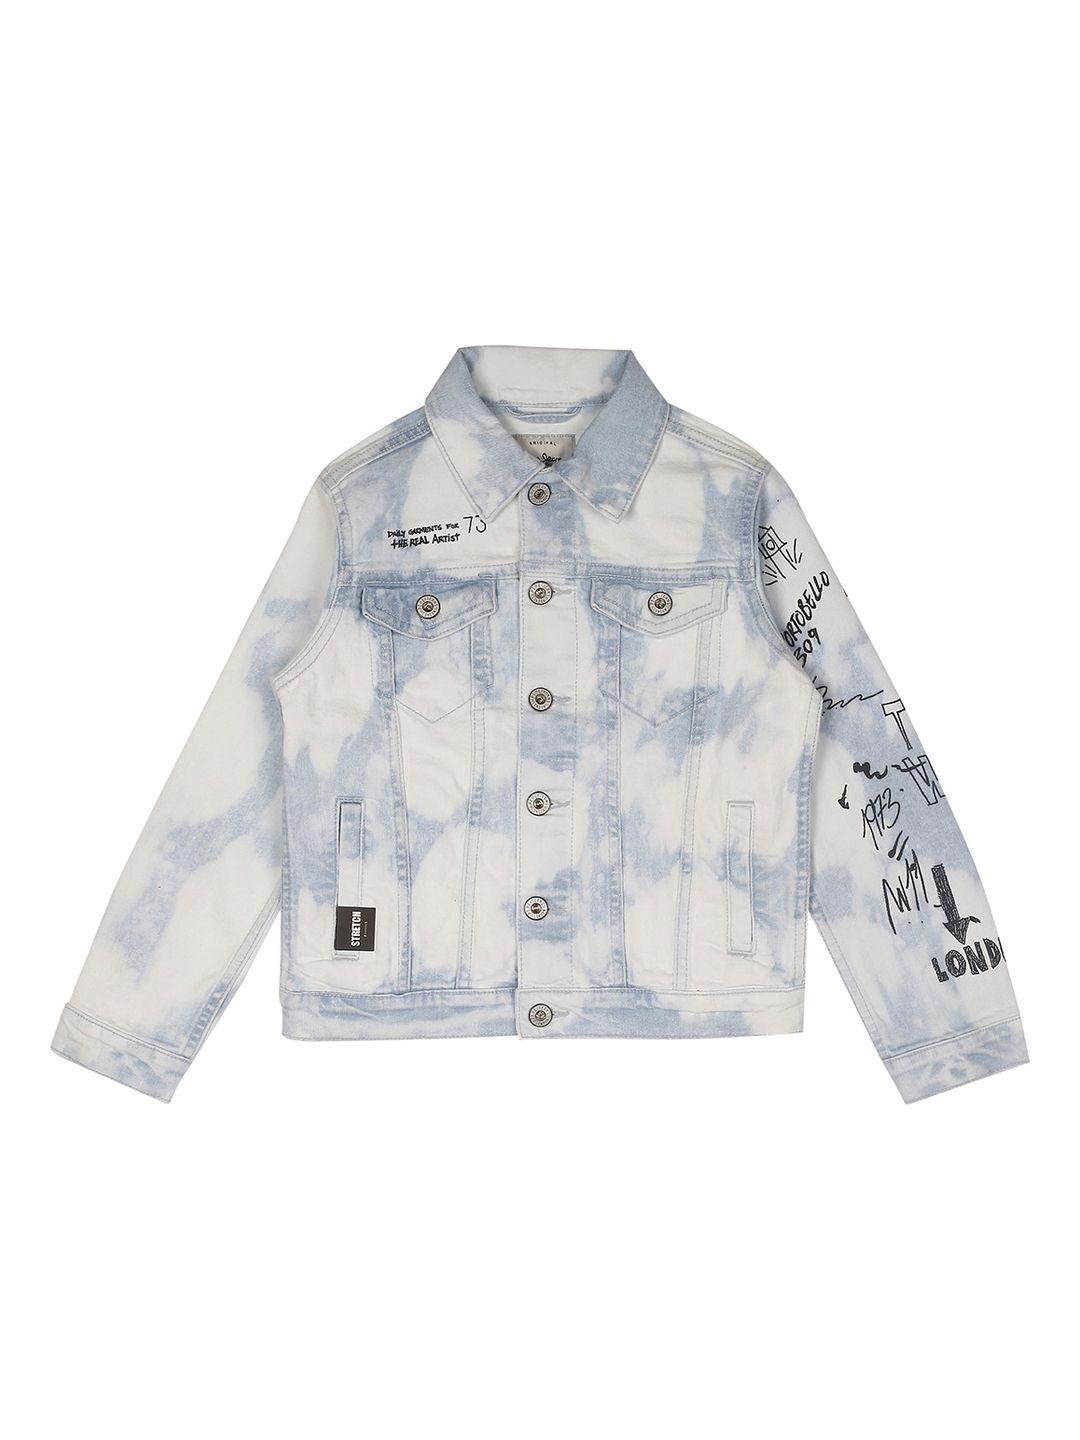 pepe-jeans-boys-spread-collar-washed-denim-jacket